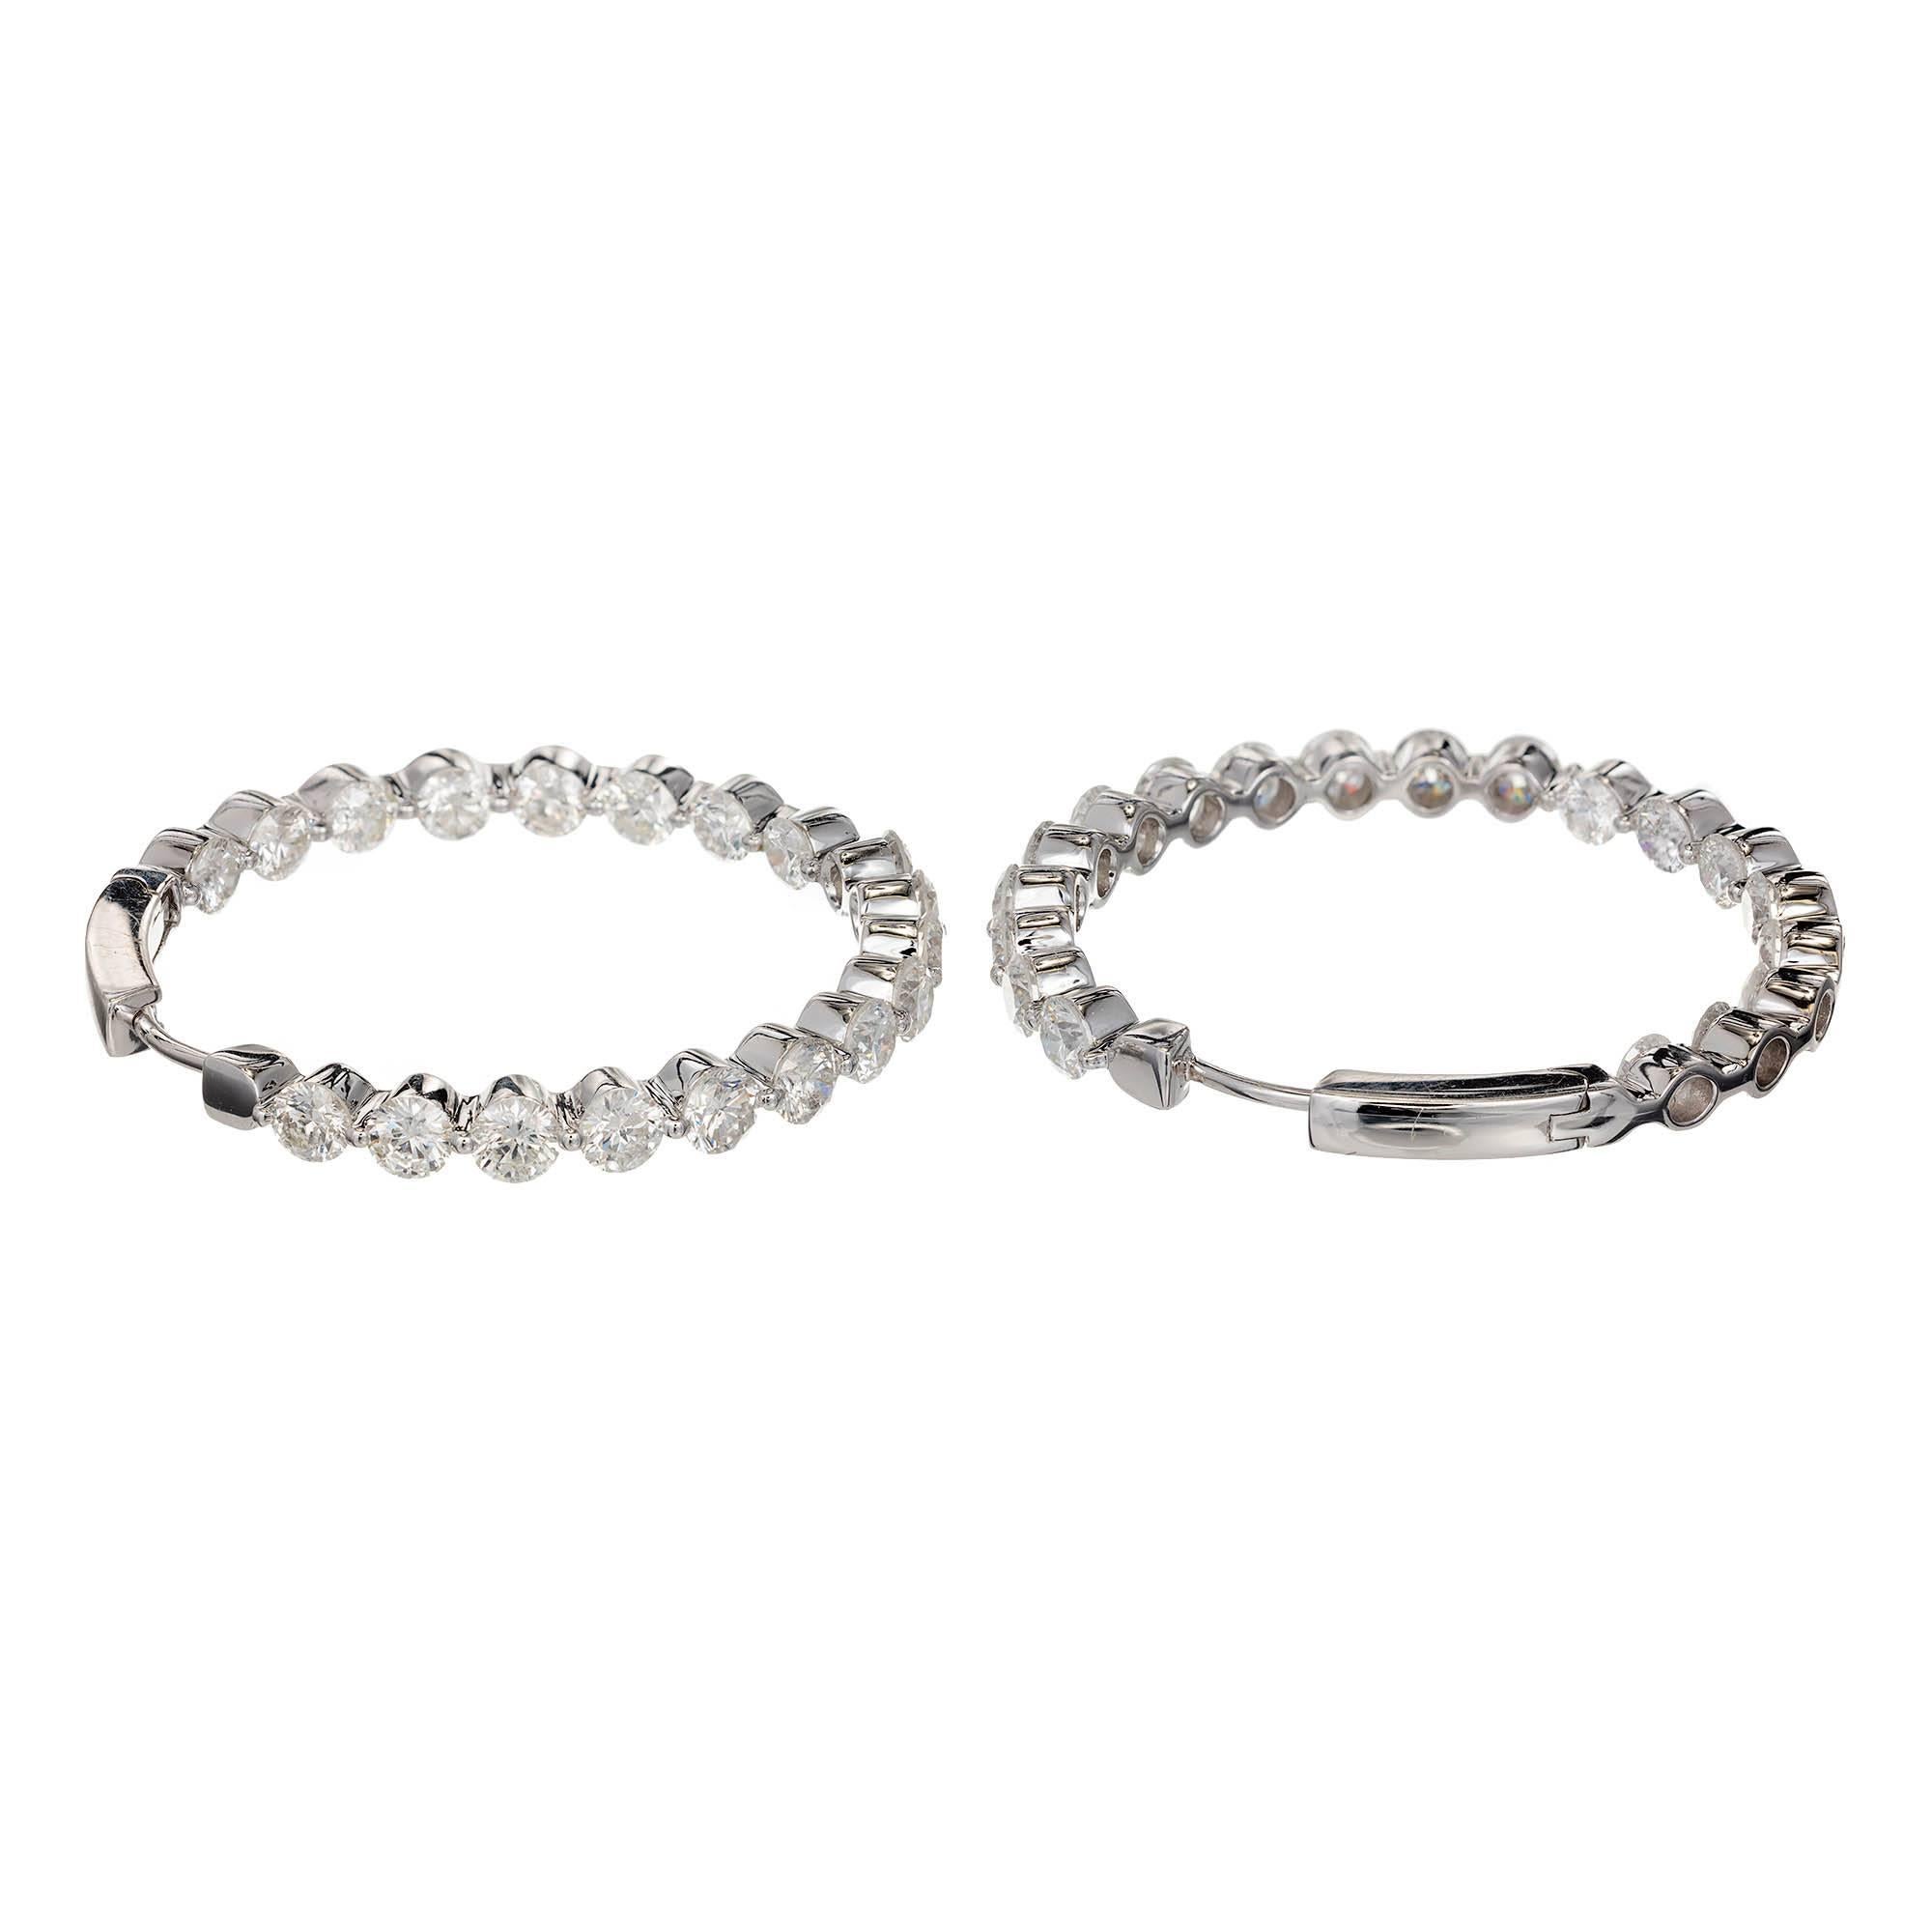 Ideal cut 1 3/8 inch diamond, diamond hoop earrings from the maker TP in 18k white gold. Extra well cut diamonds. Extra well-made hoops. Secure locking mechanism. 
38 Ideal cut diamonds E color, VS2 to SI1 clarity. 6.07ct total weight
18k White